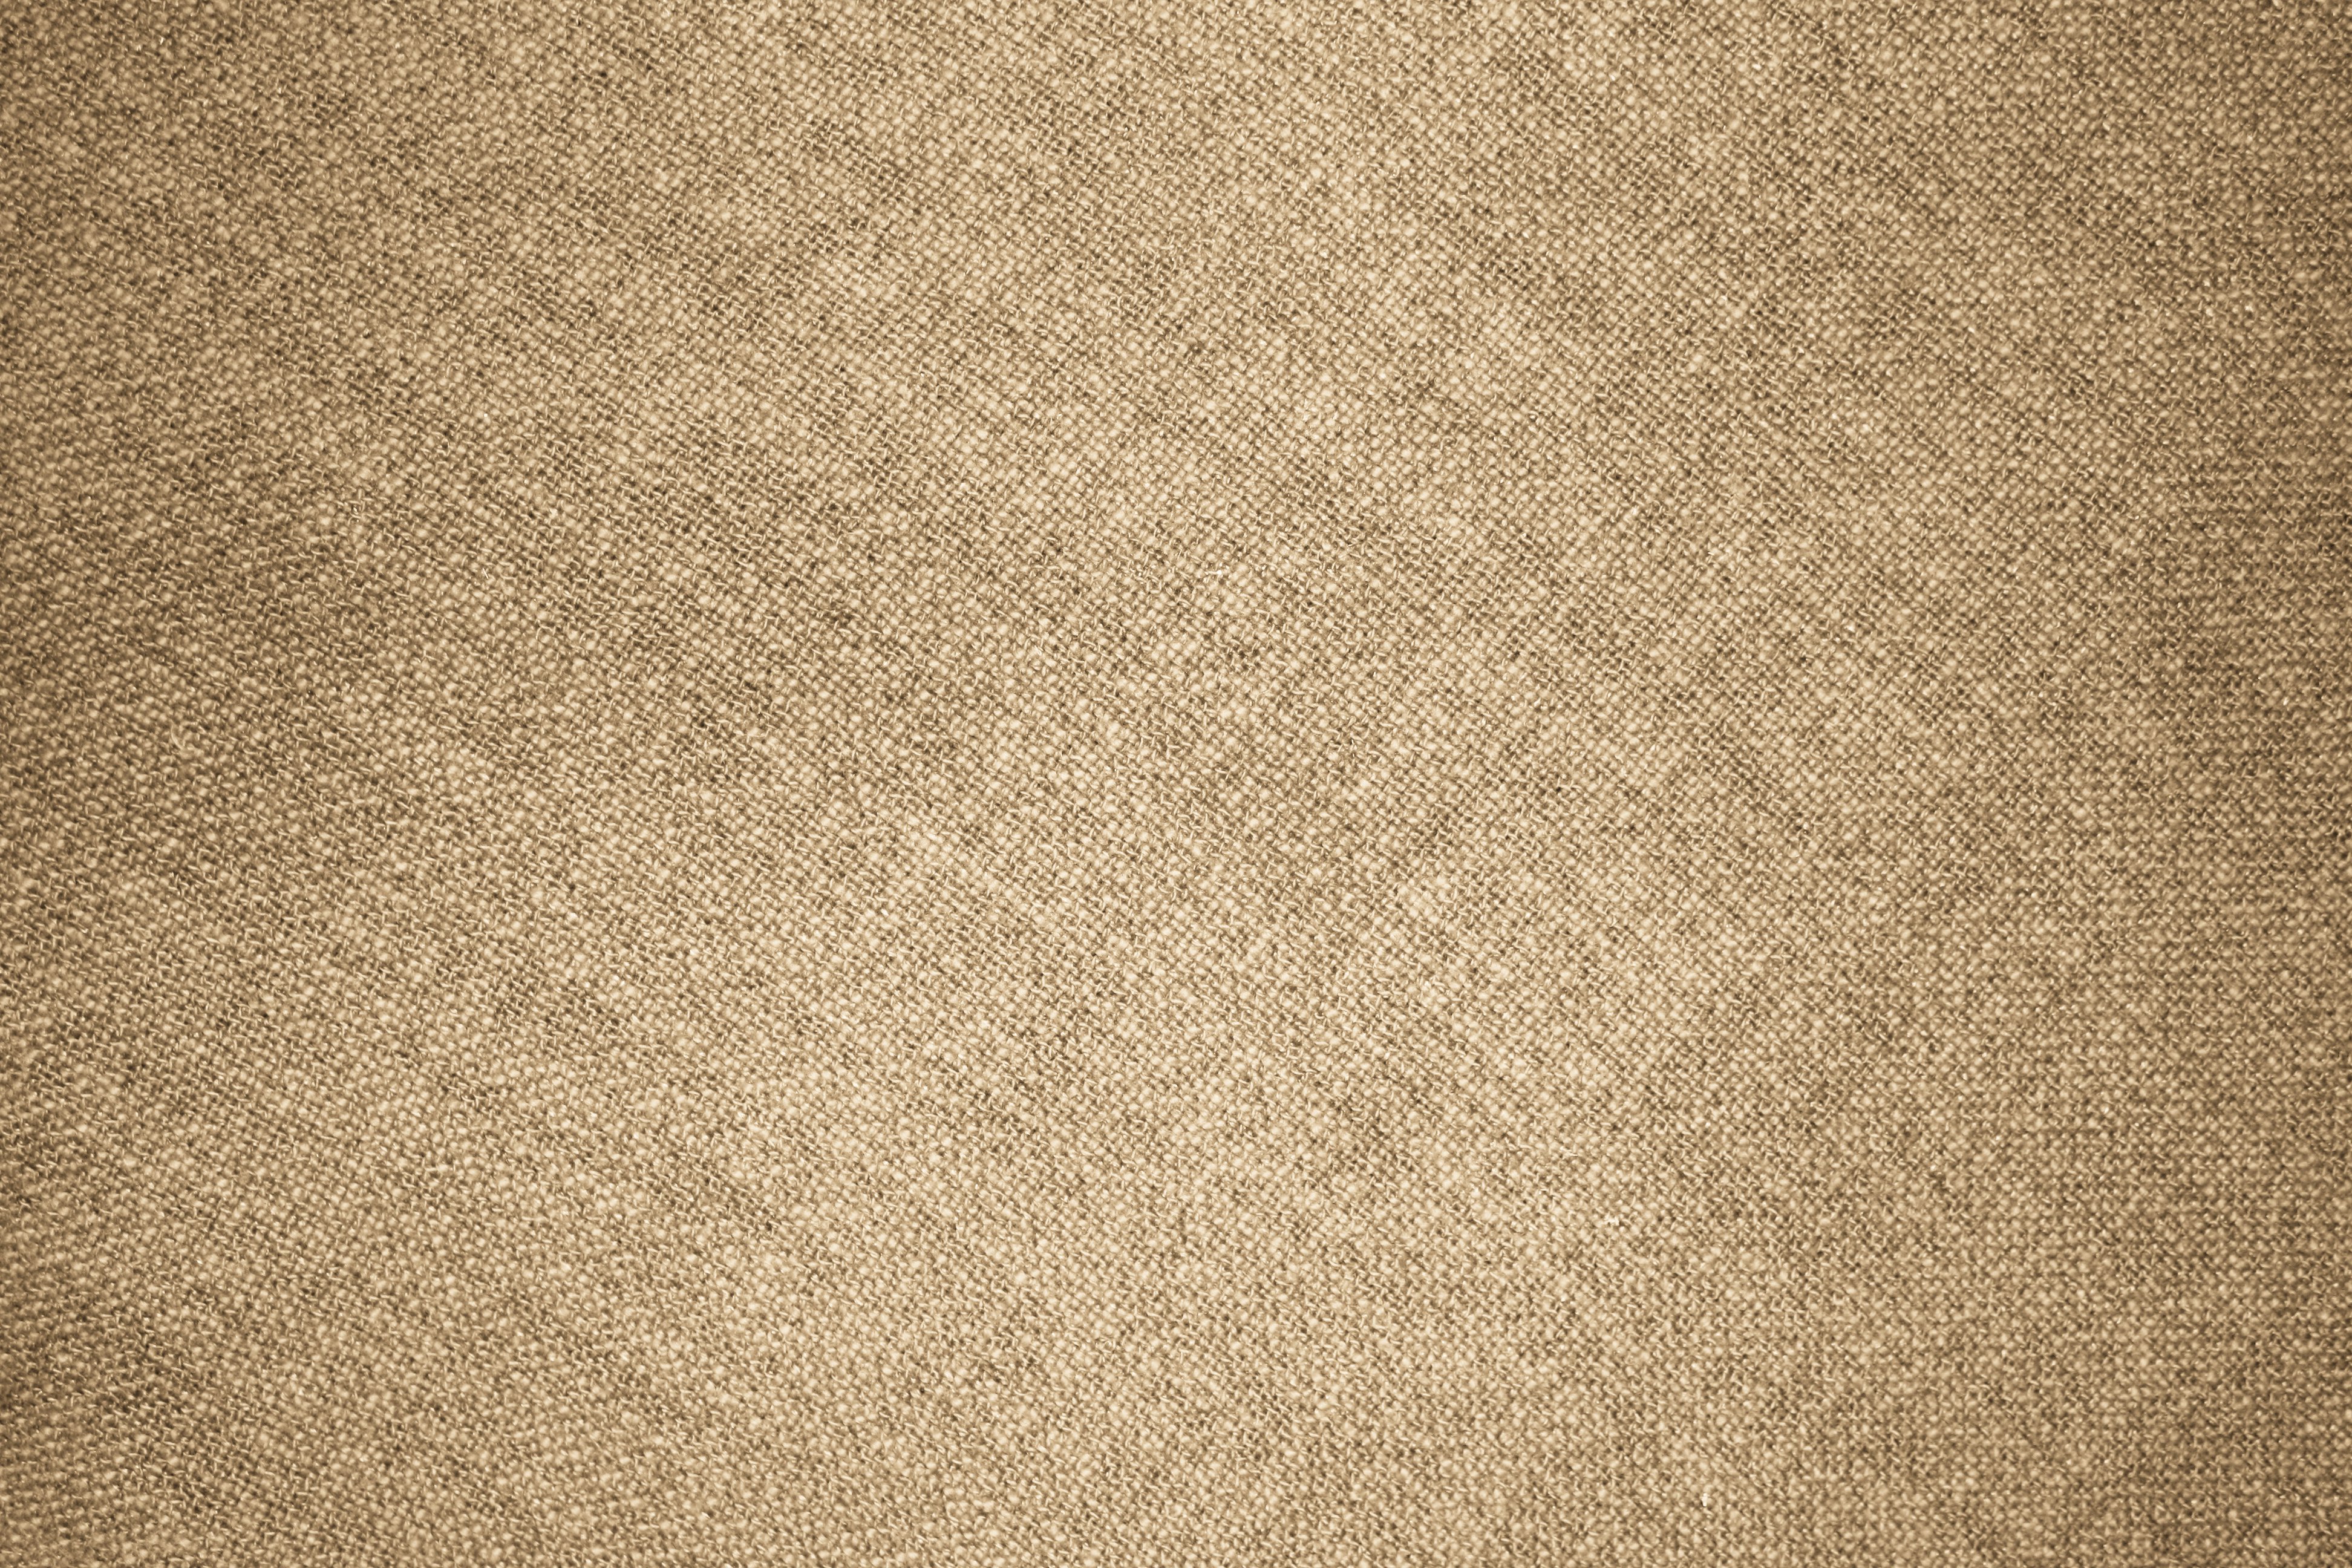 Tan Fabric Texture Picture.